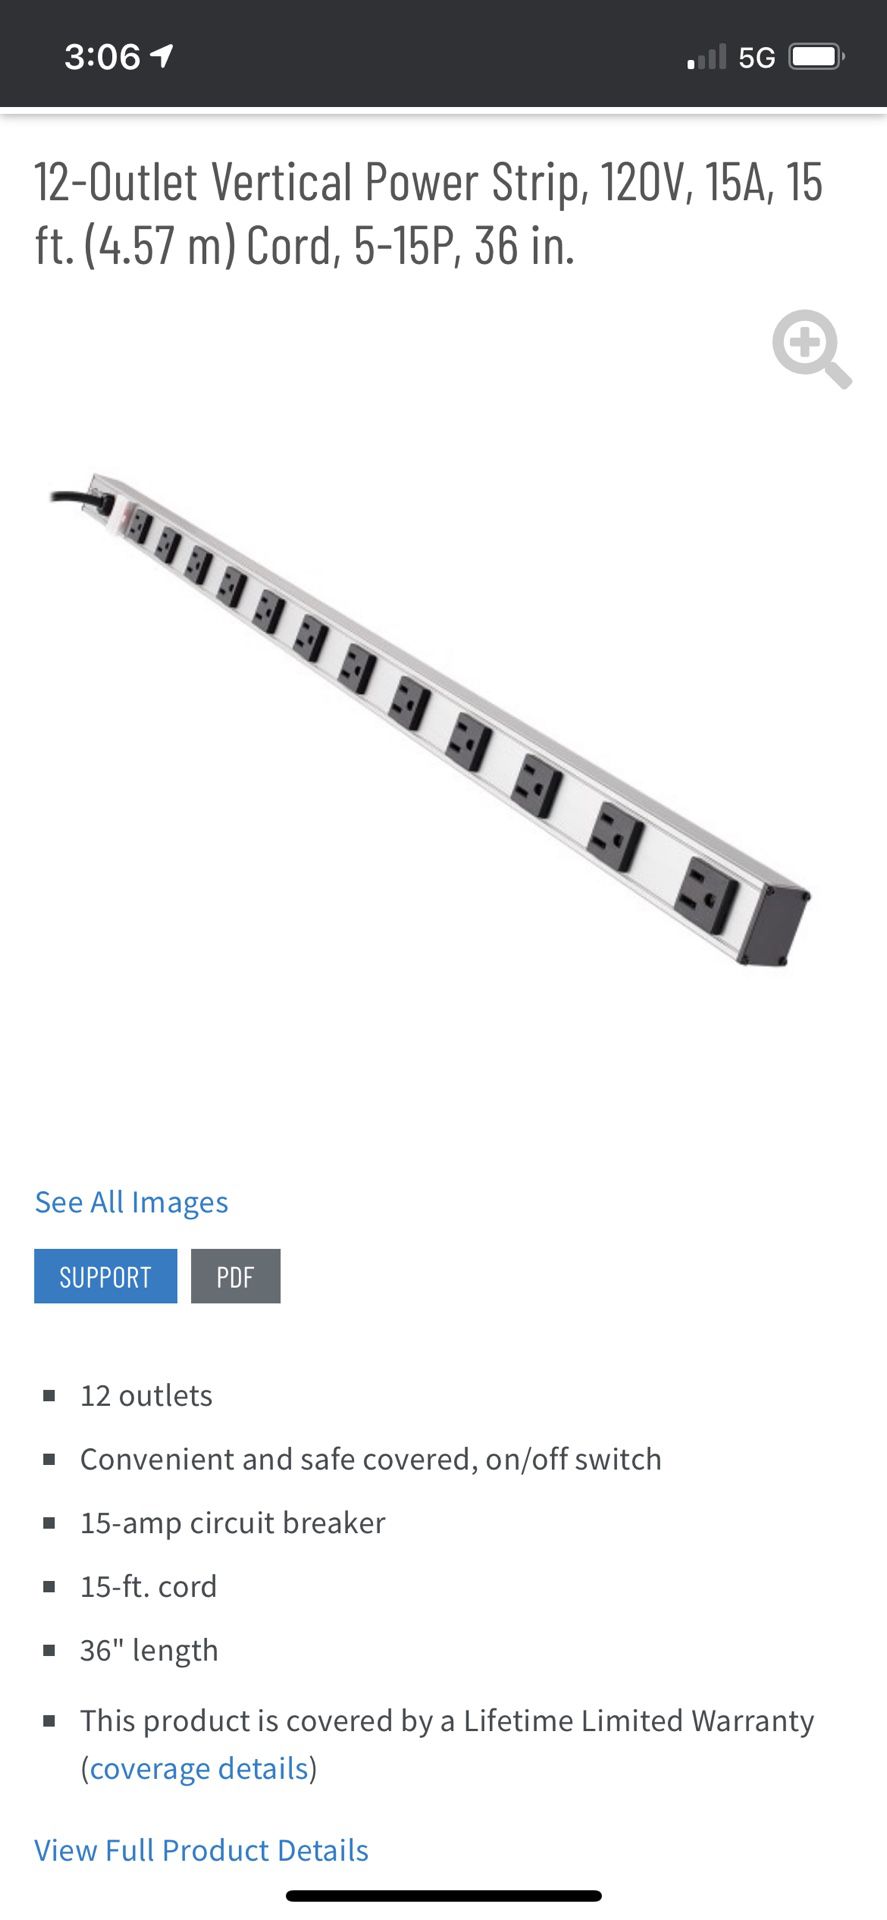 12-Outlet Vertical Power Strip